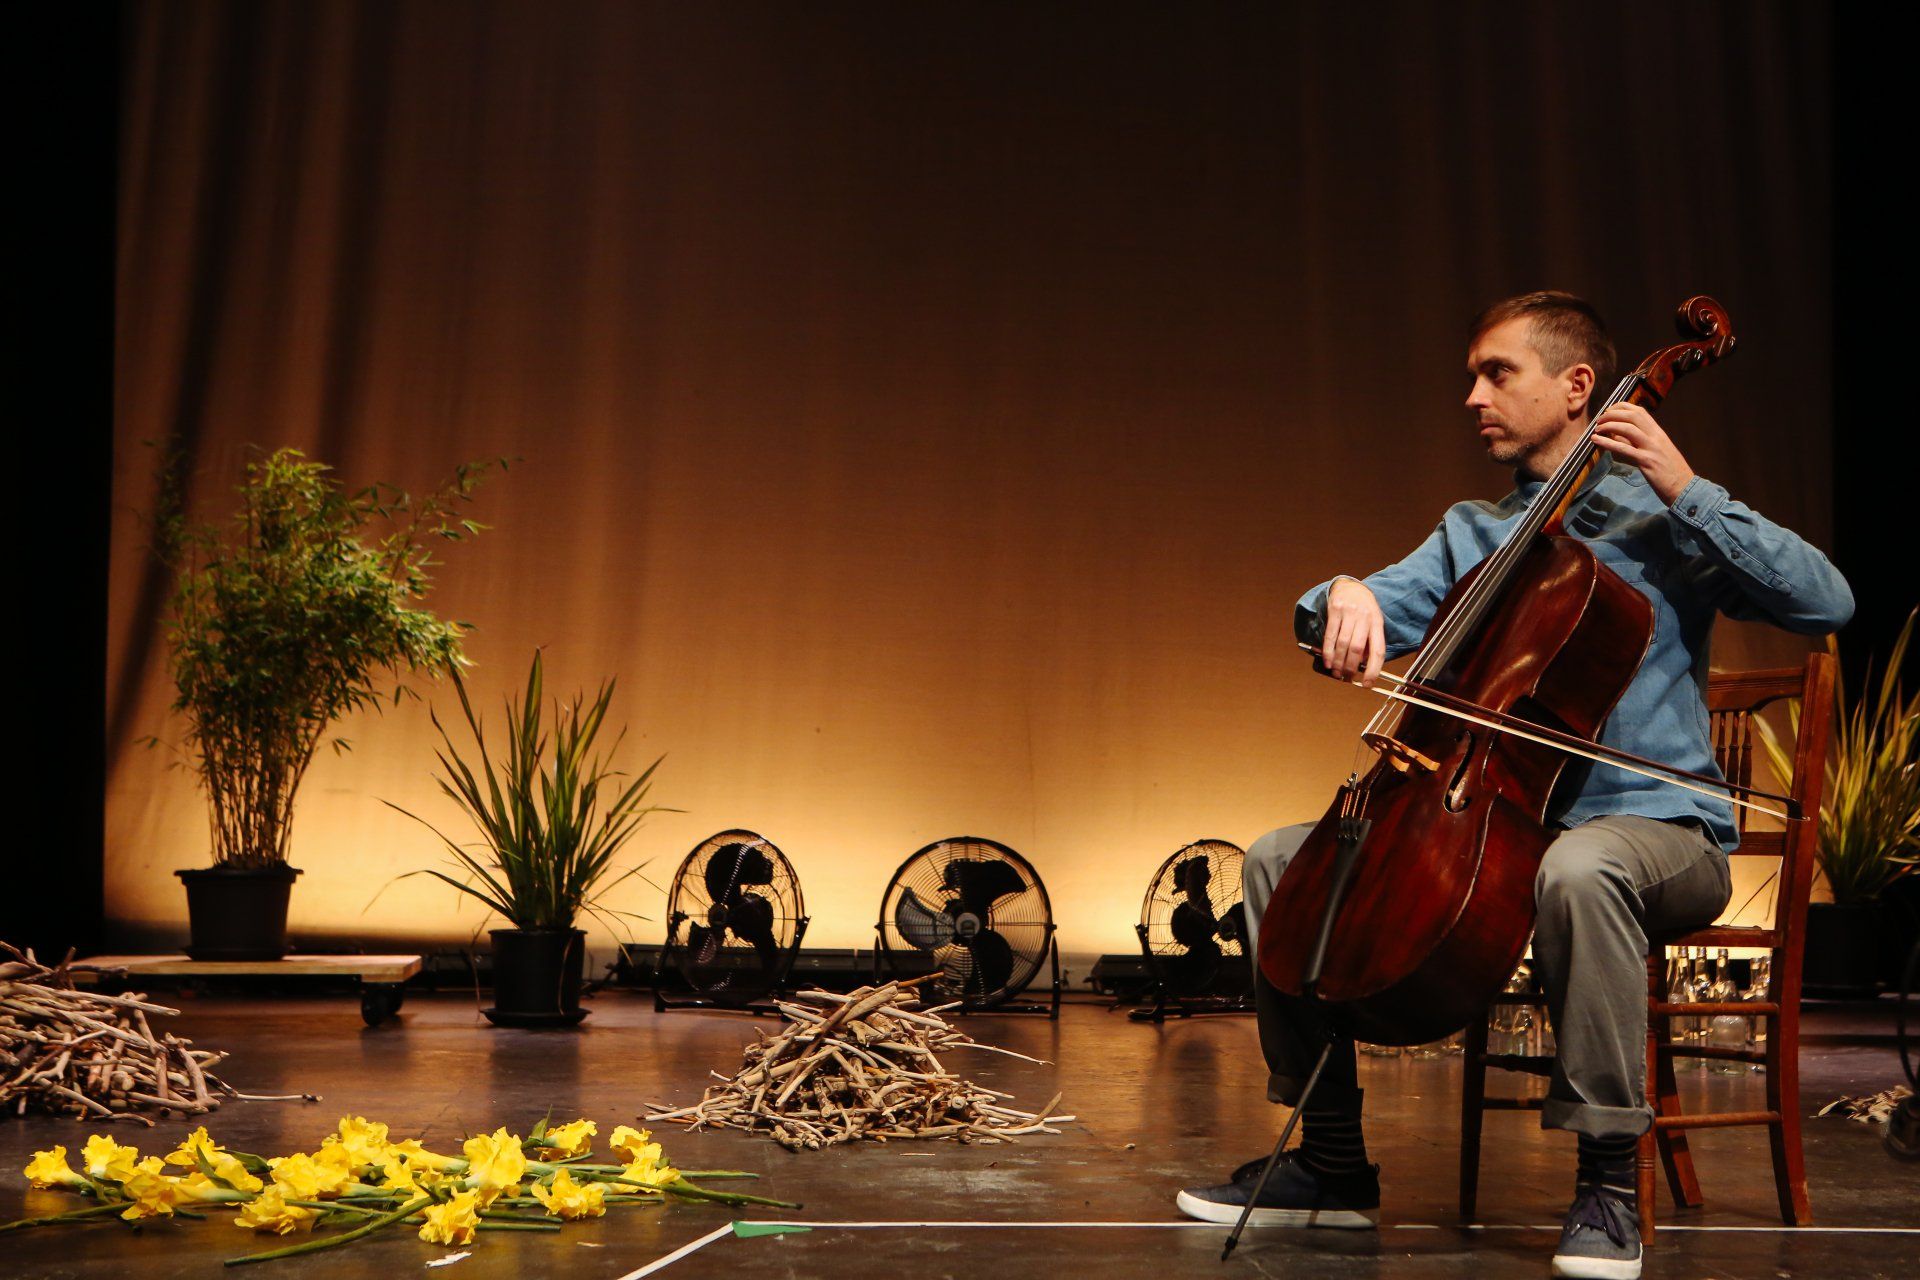 a man is sitting on a chair playing a cello on a stage .